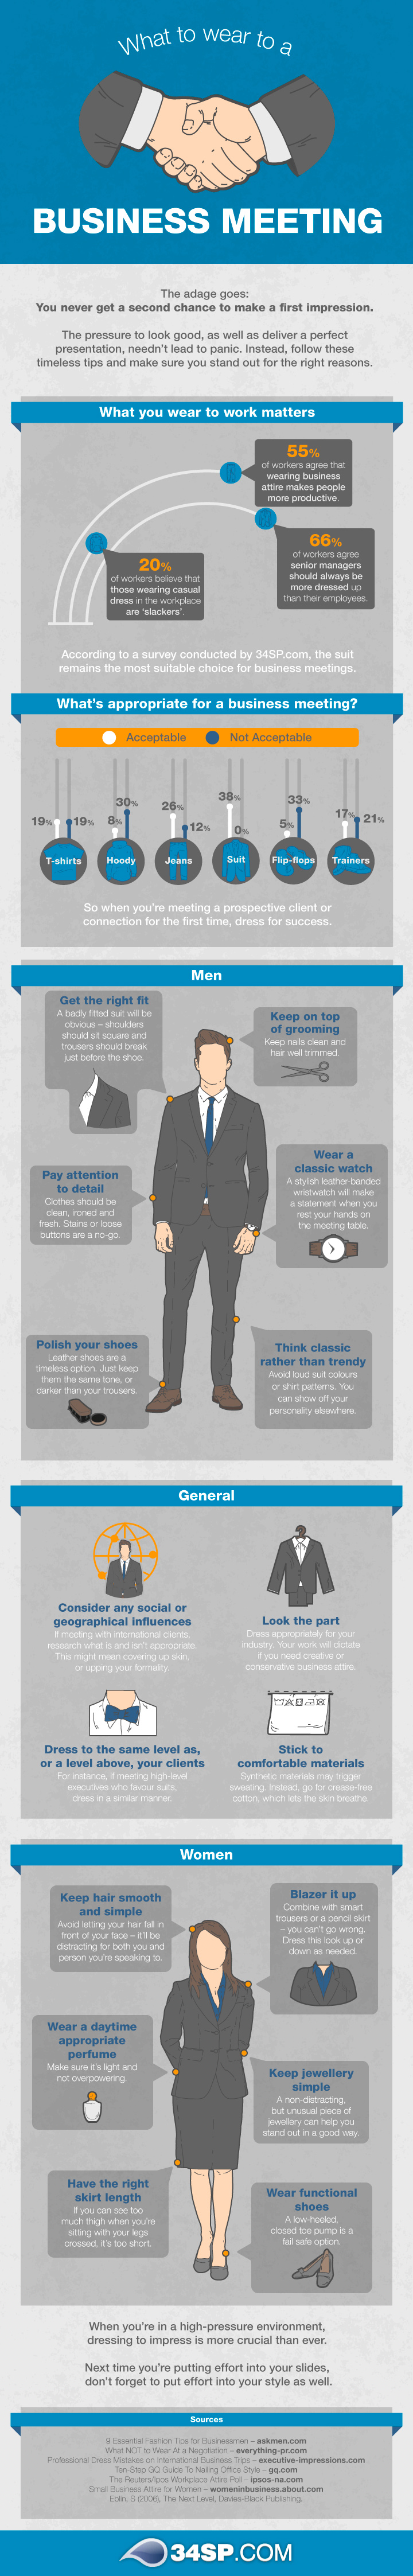 how to dress